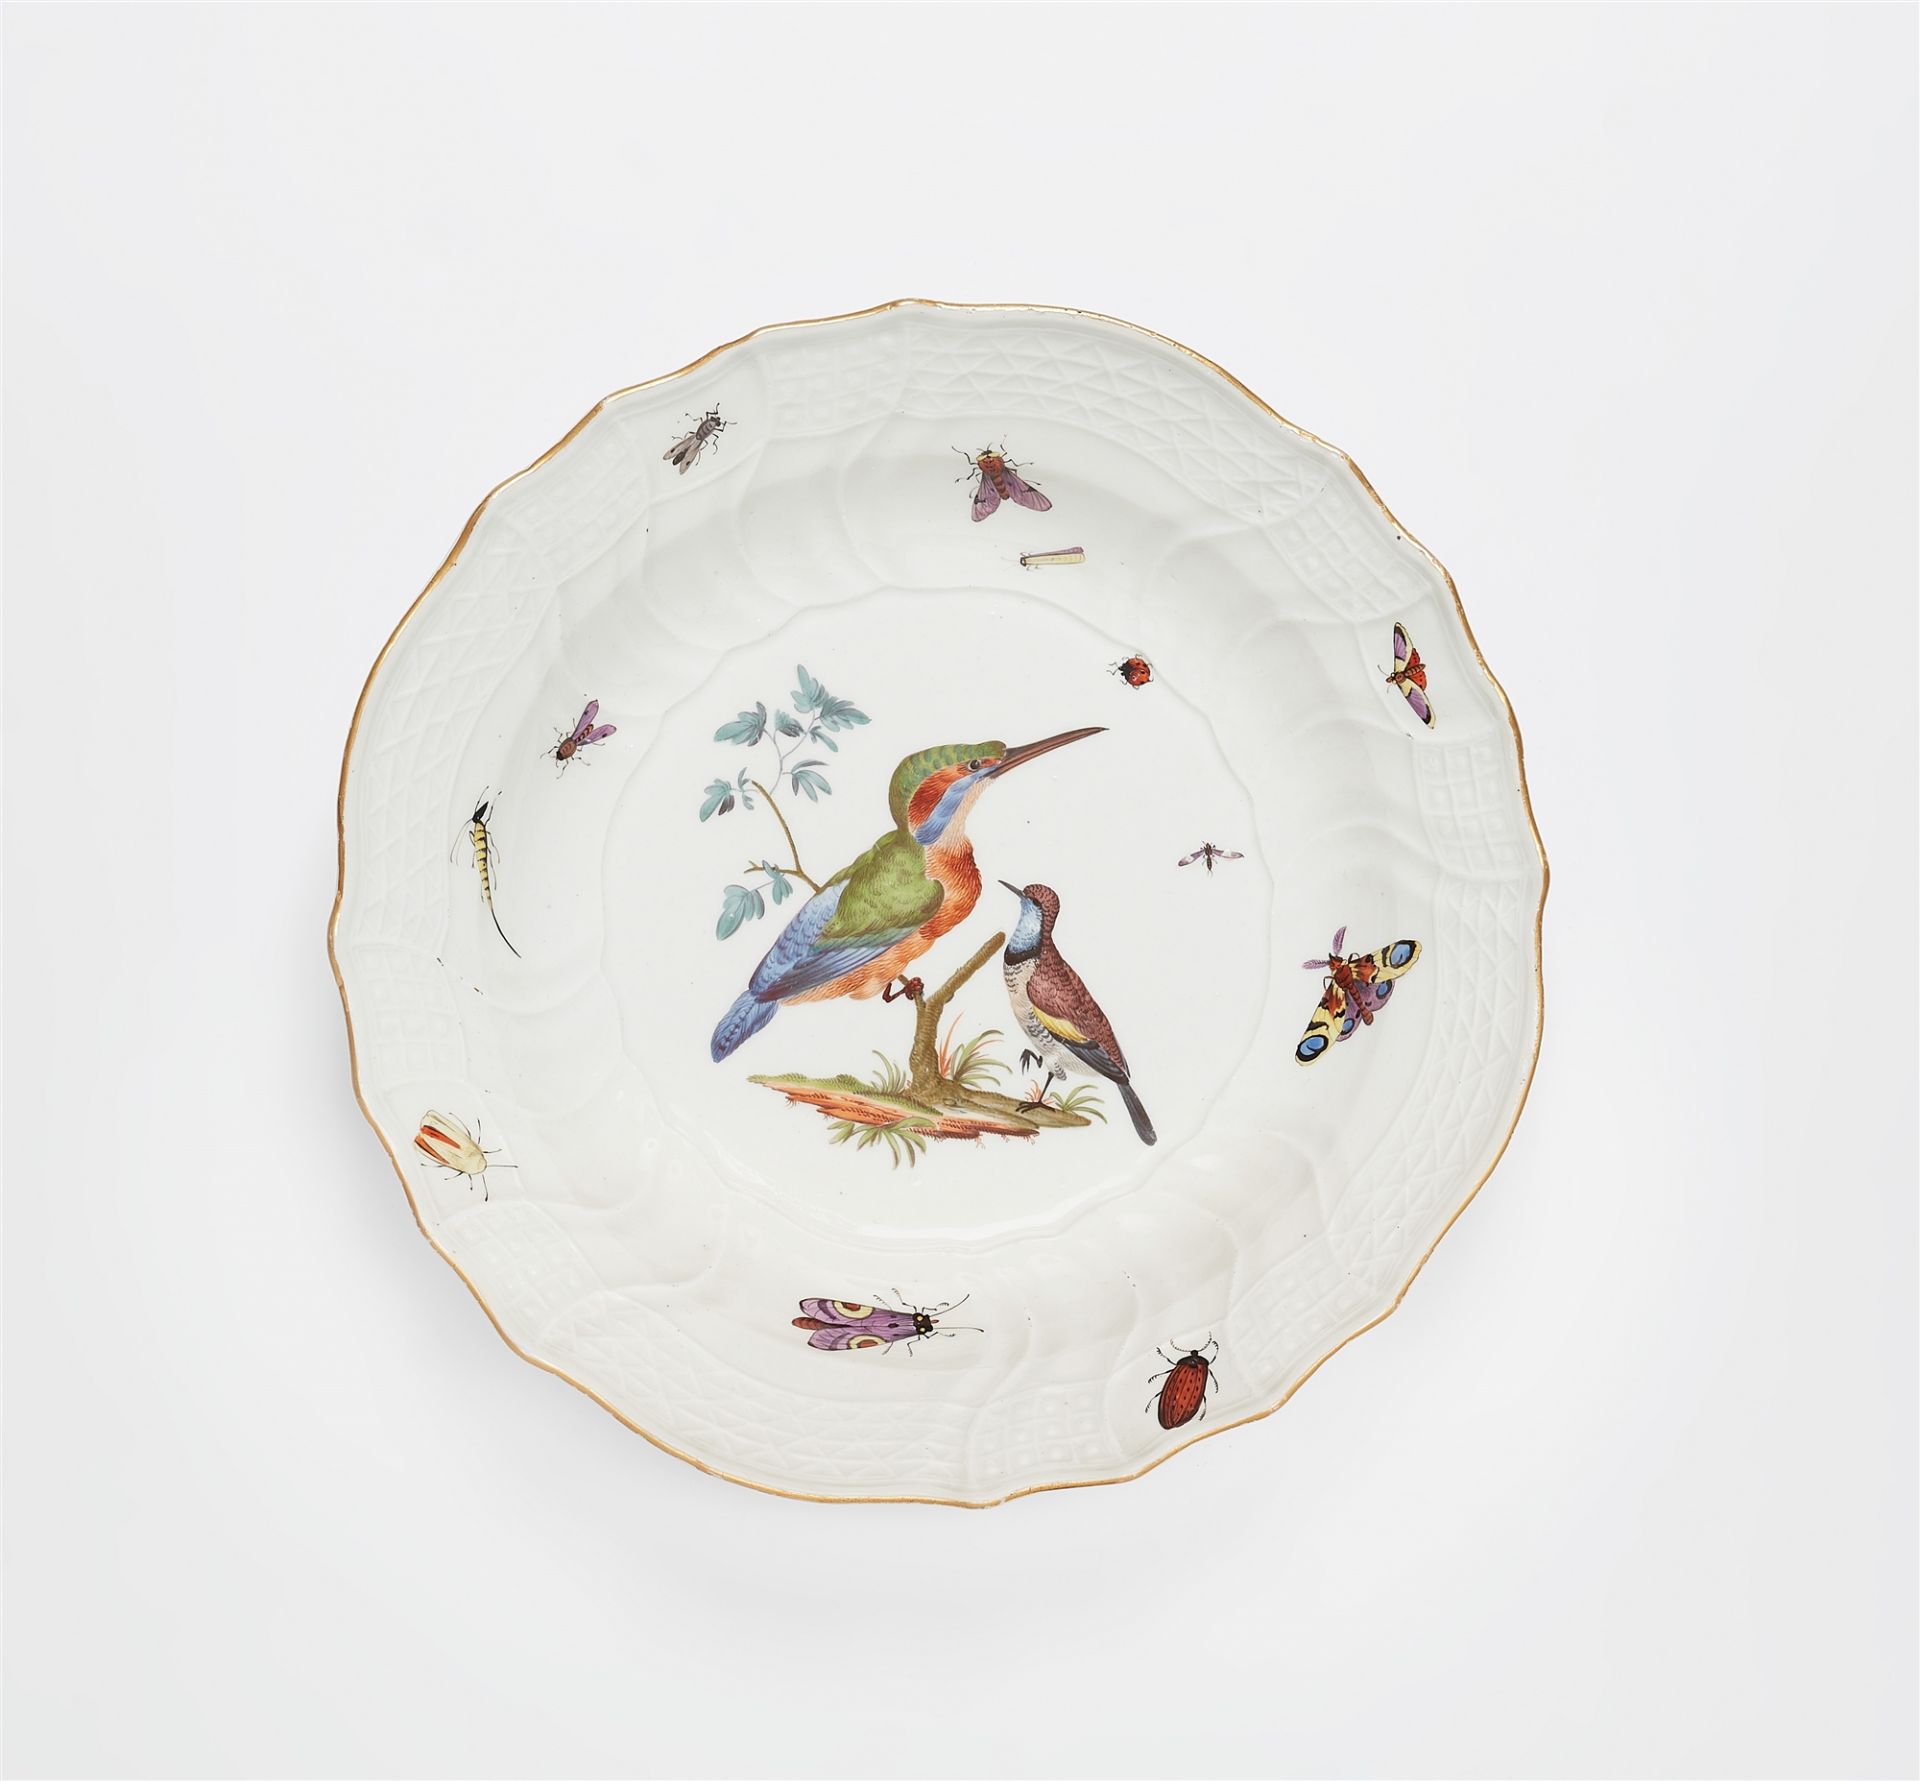 A round Meissen porcelain plate from a dinner service with Continental birds made for King Frederick